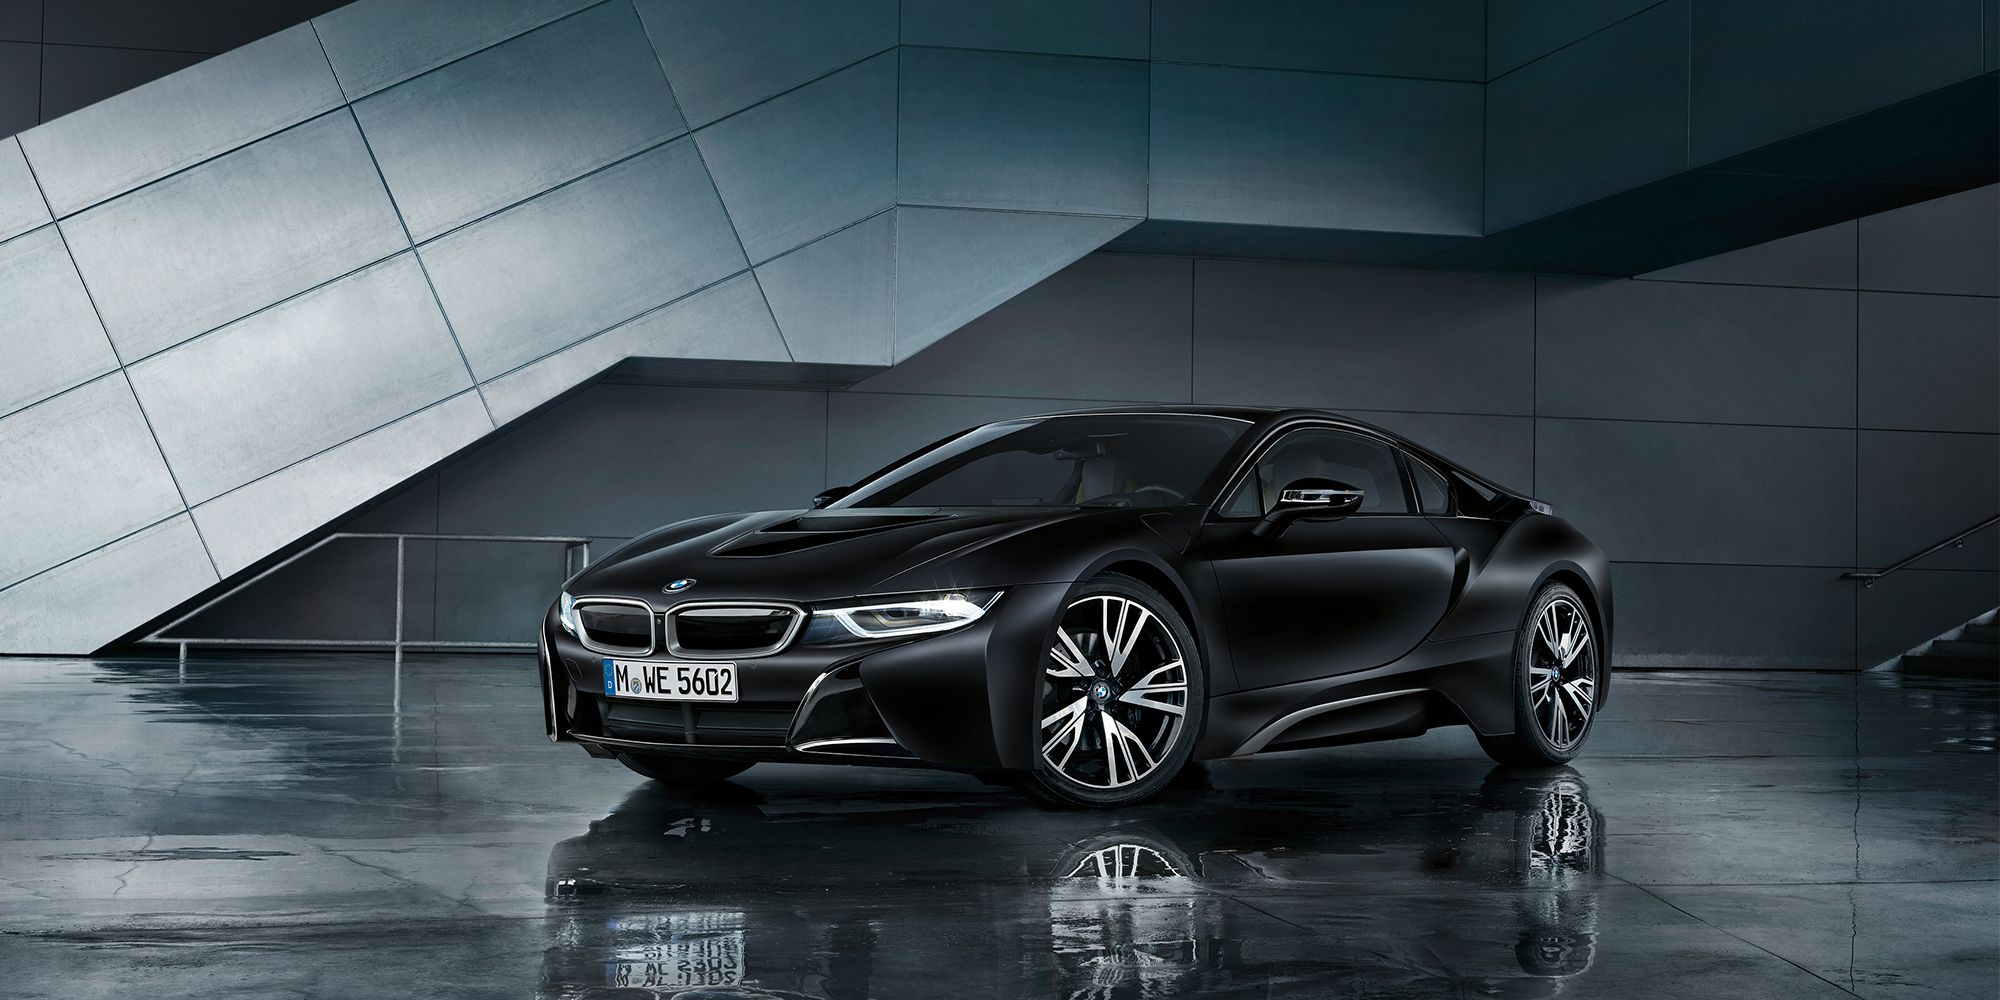 The i8 Frozen Black Edition